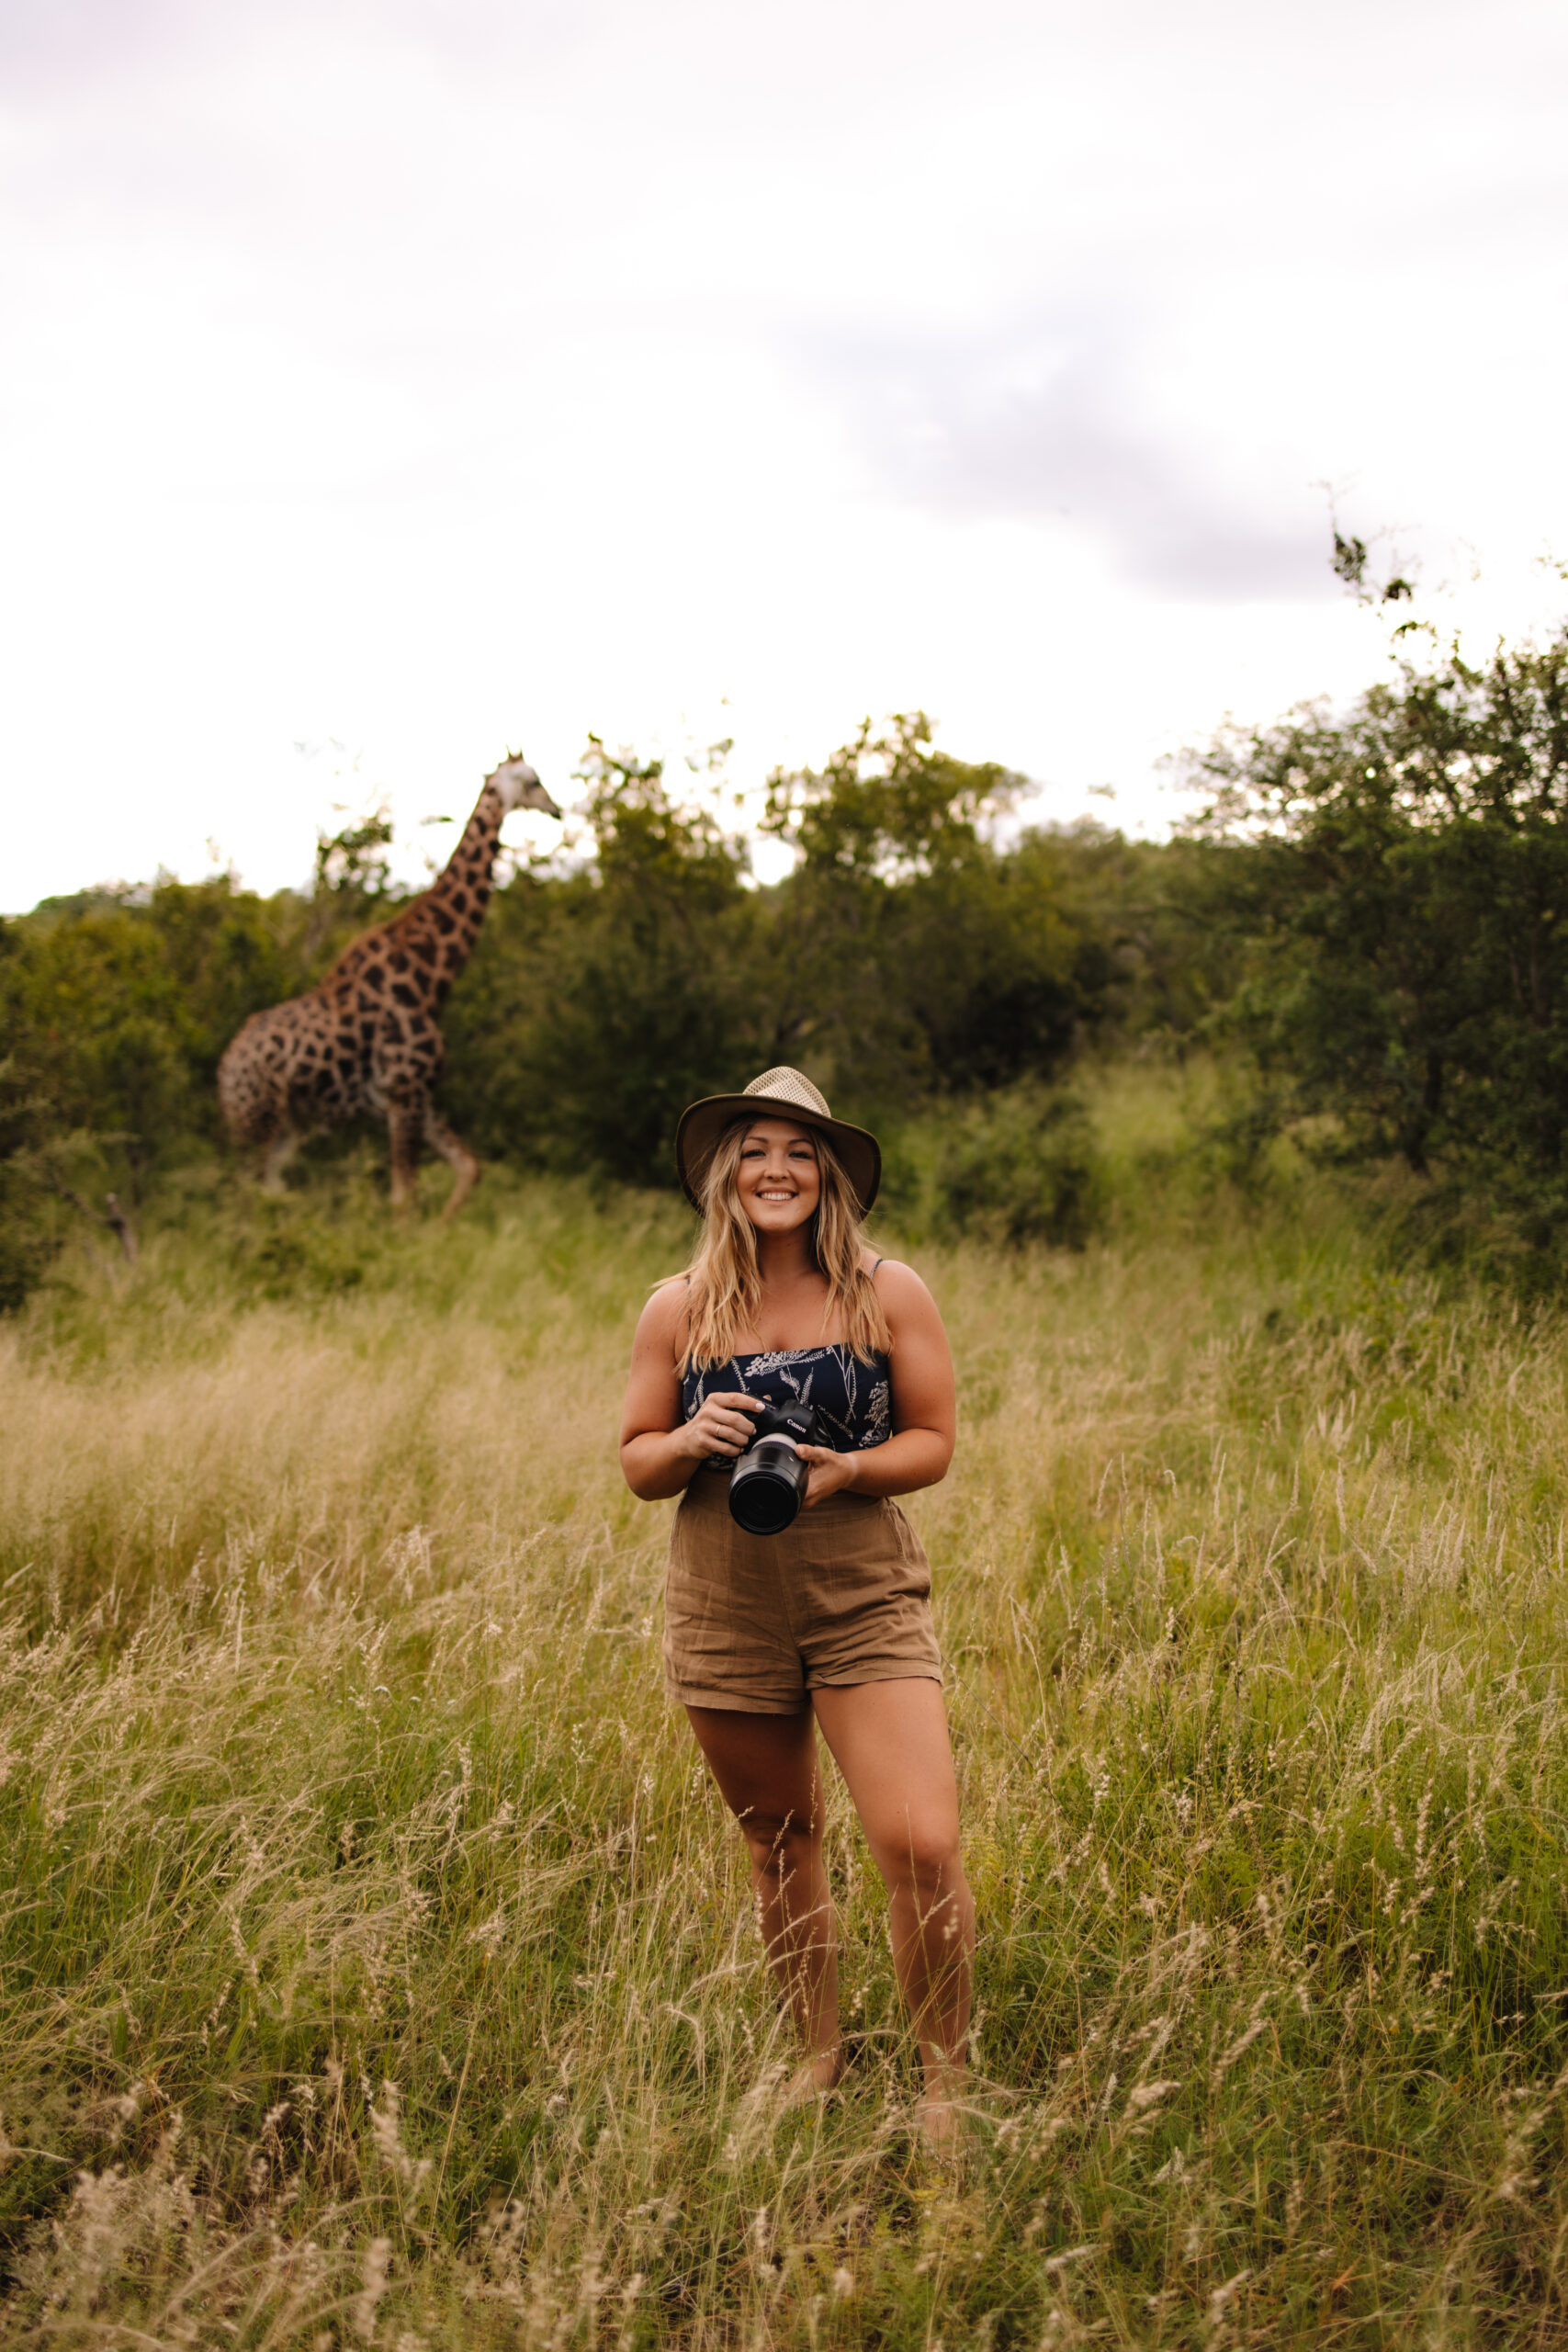 A wedding photographer with her camera standing in the long green grass with a giraffe walking behind her